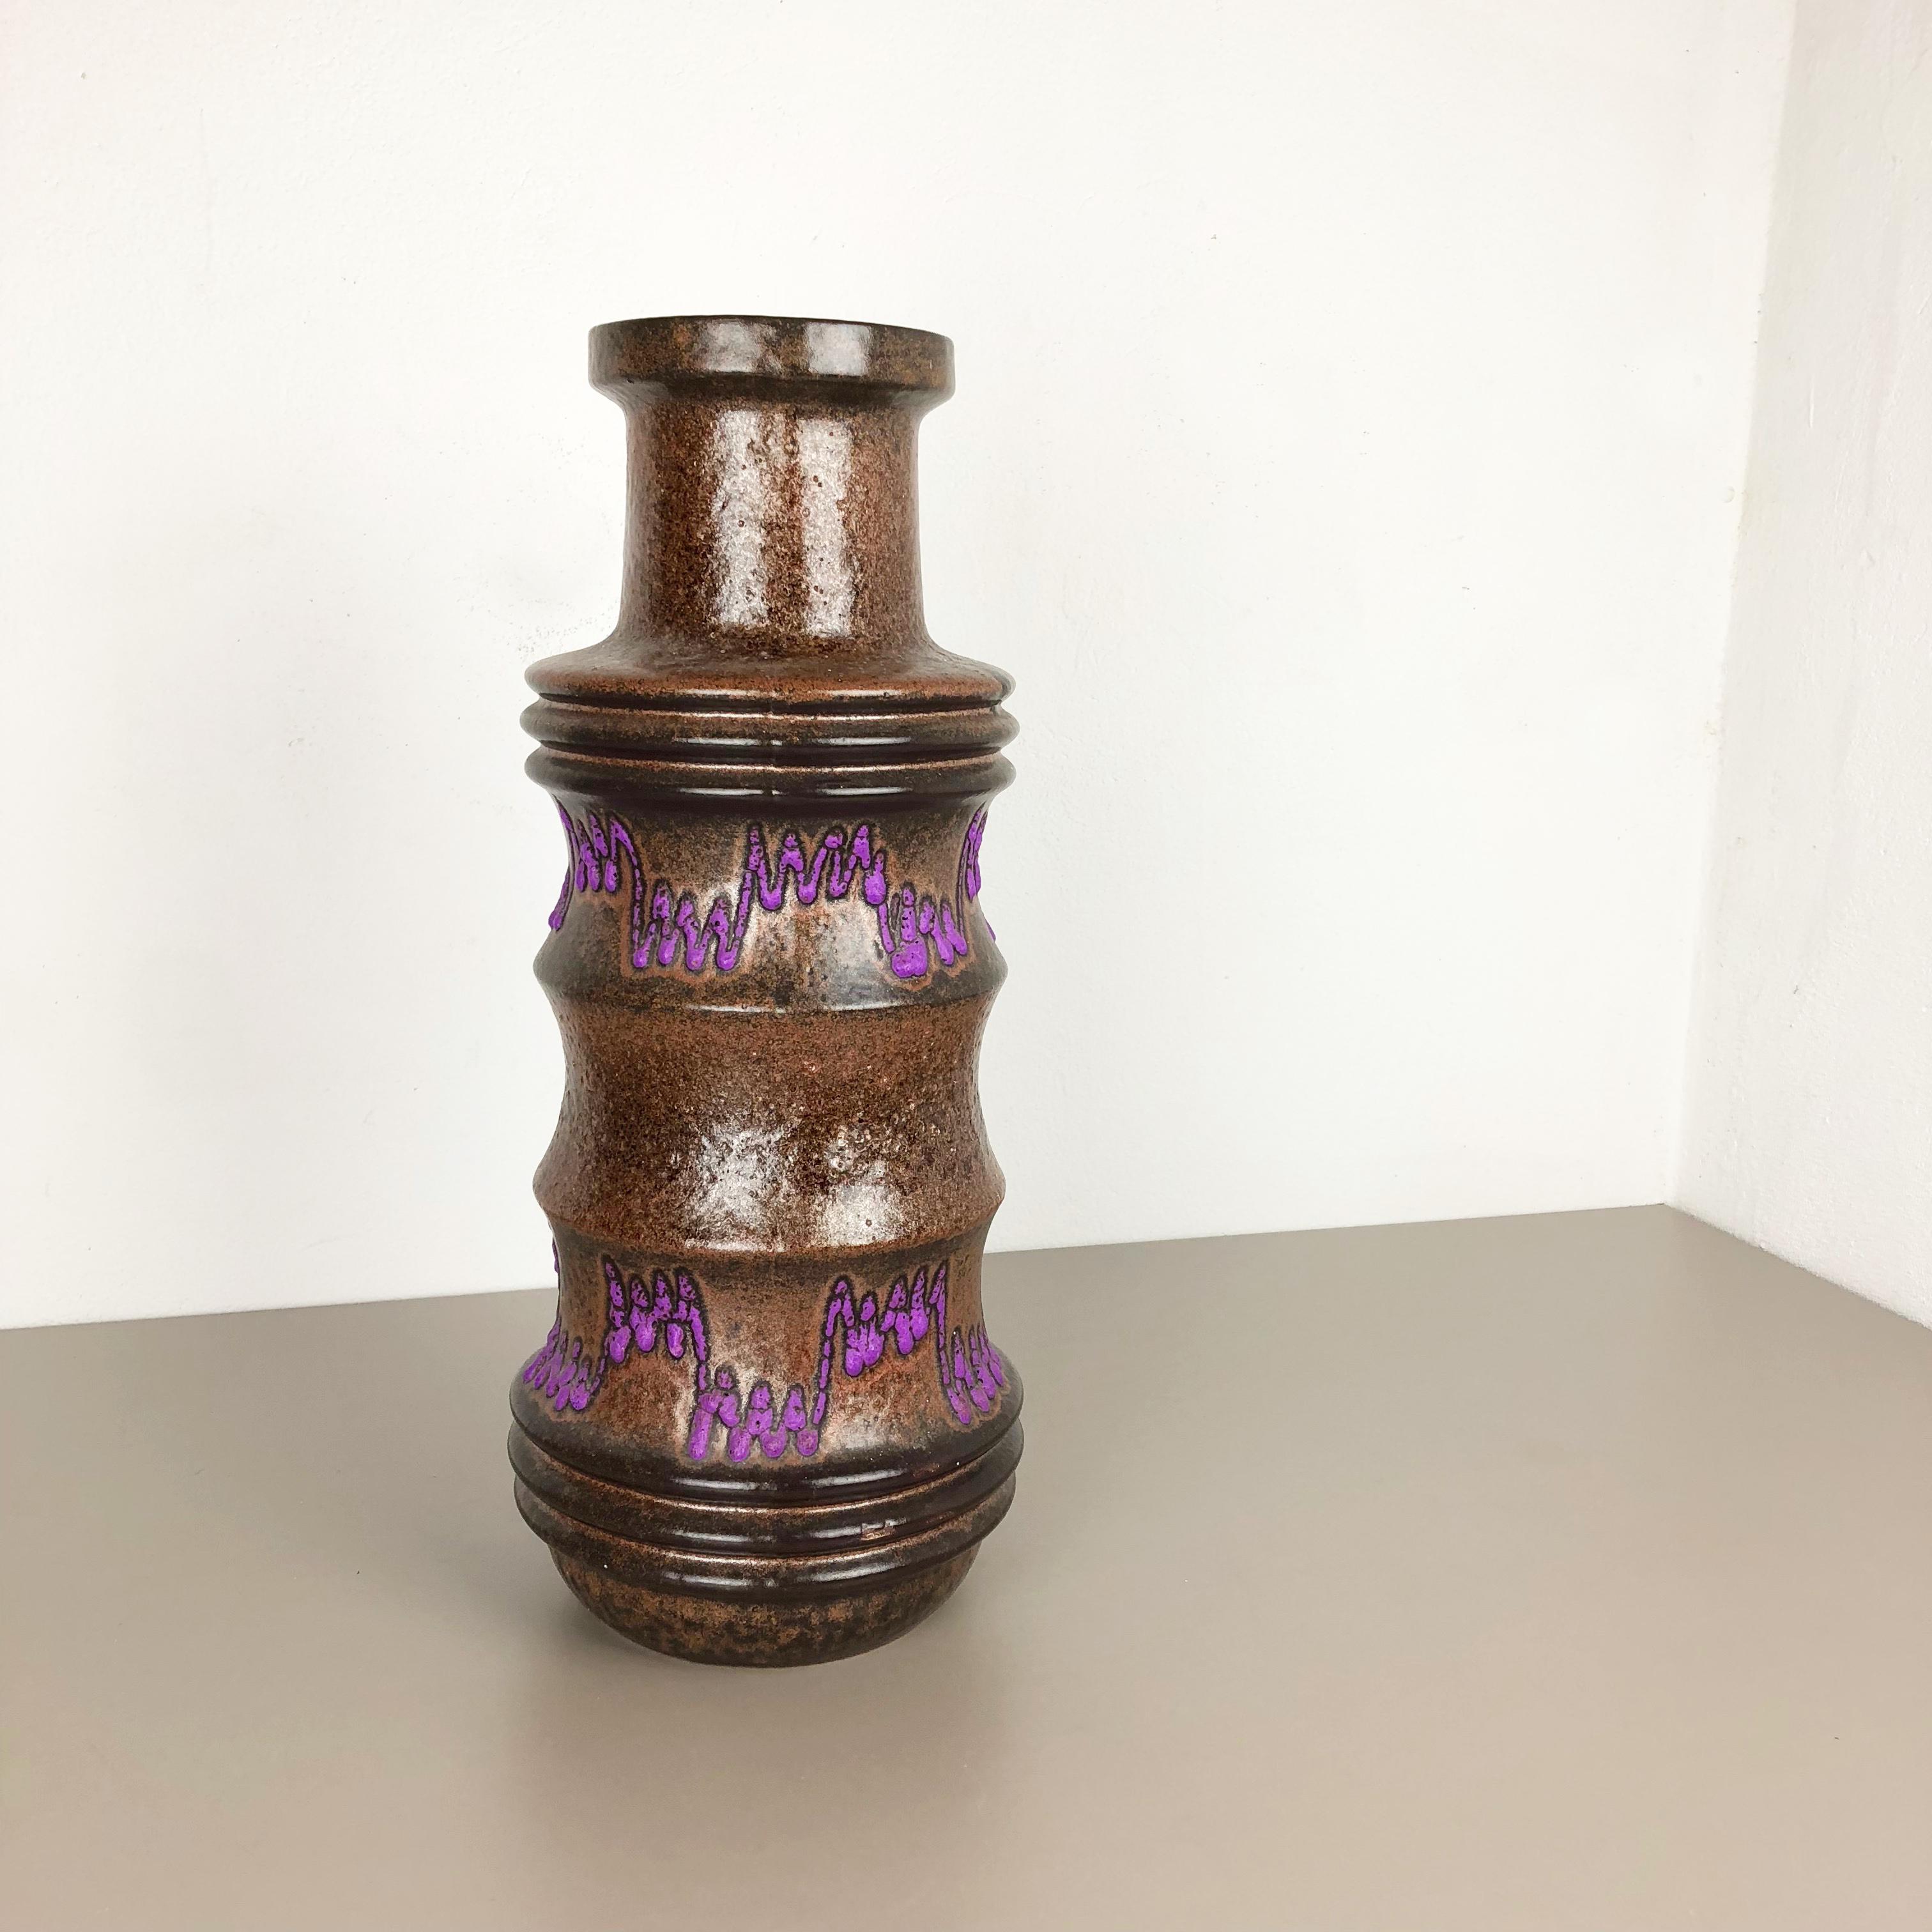 Article:

Fat lava art vase



Producer:

Scheurich, Germany



Decade:

1970s


Description:

This original vintage vase was produced in the 1970s in Germany. it is made of ceramic pottery in fat lava optic. Super rare in this